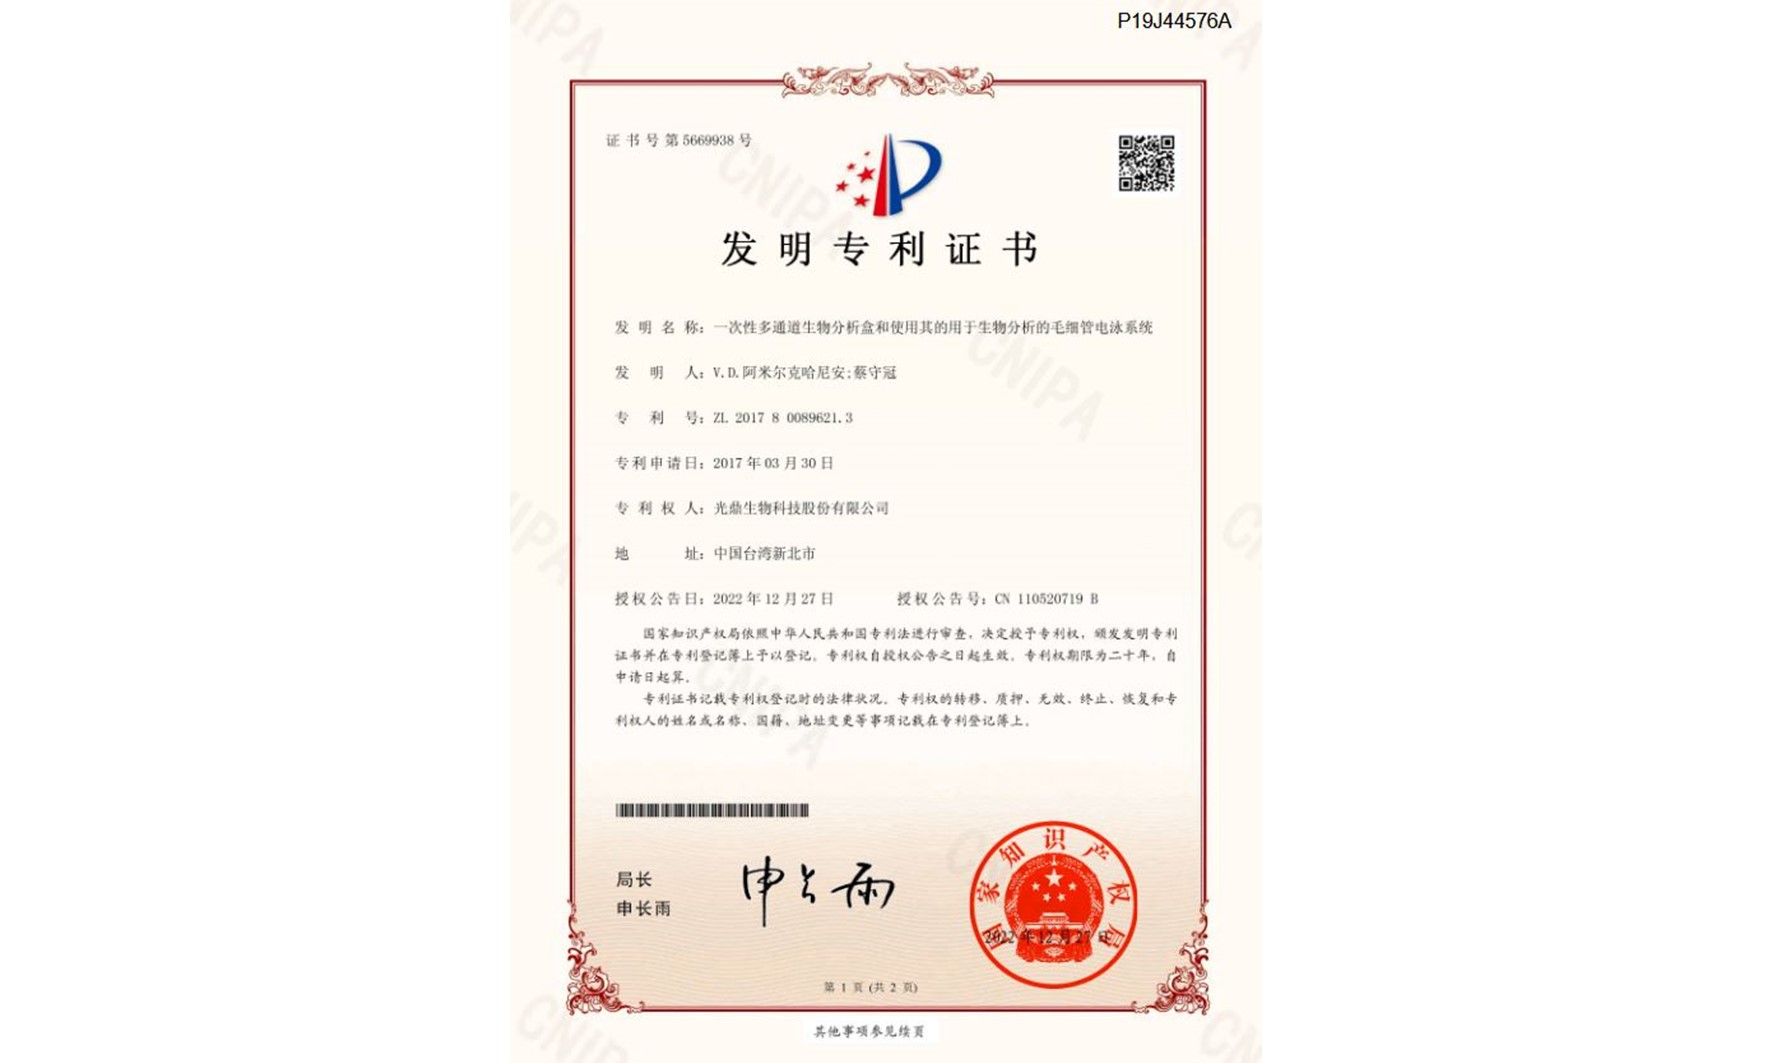 【Congratulations！】We have received a China patent